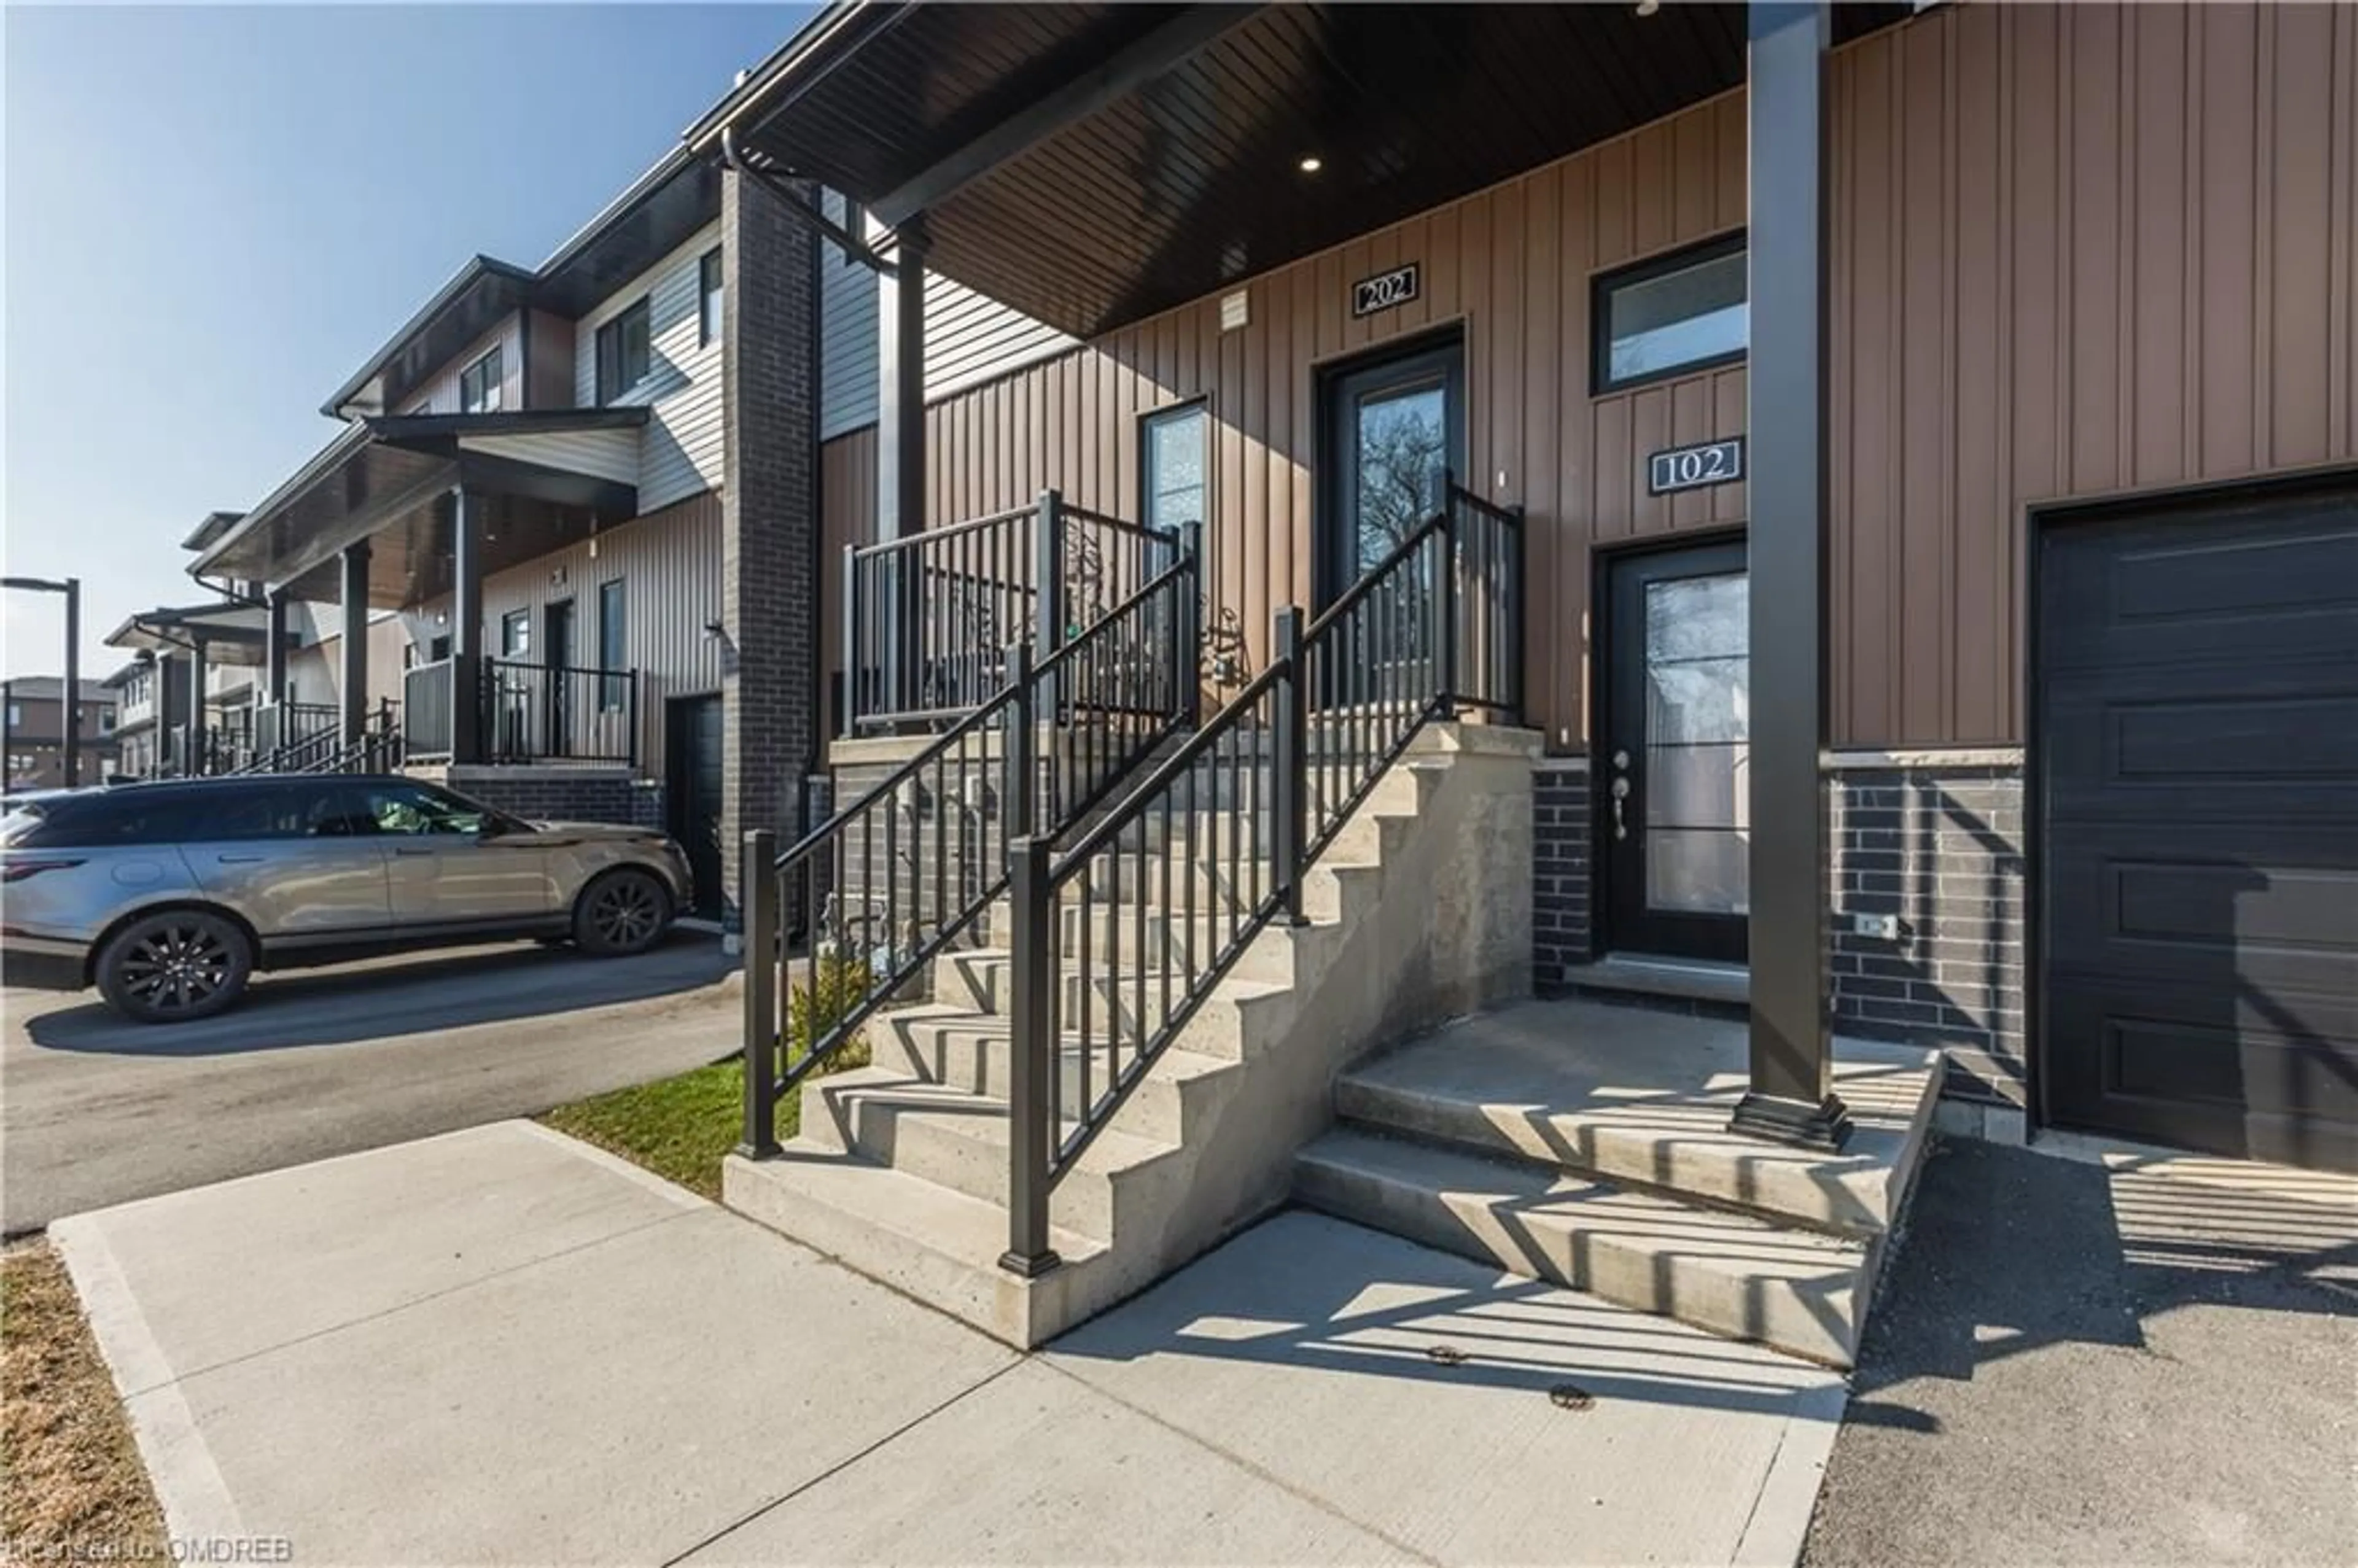 A pic from exterior of the house or condo for 6591 Montrose Rd #202, Niagara Falls Ontario L2H 1M3